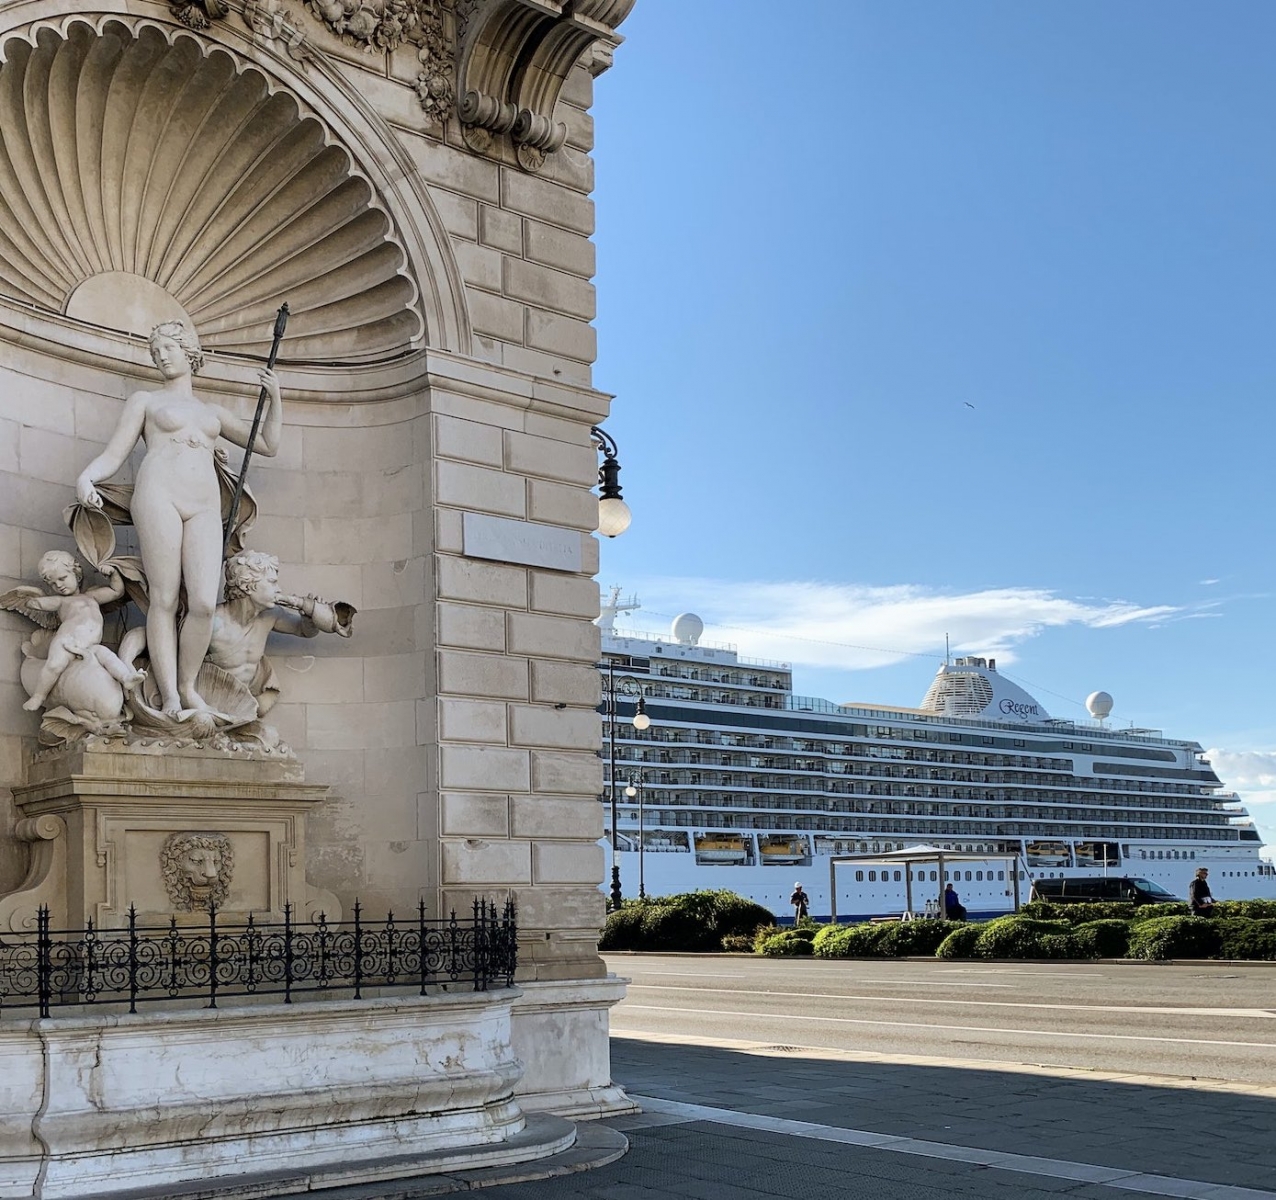 Grotto of Venus and Cruise liner in port of Trieste